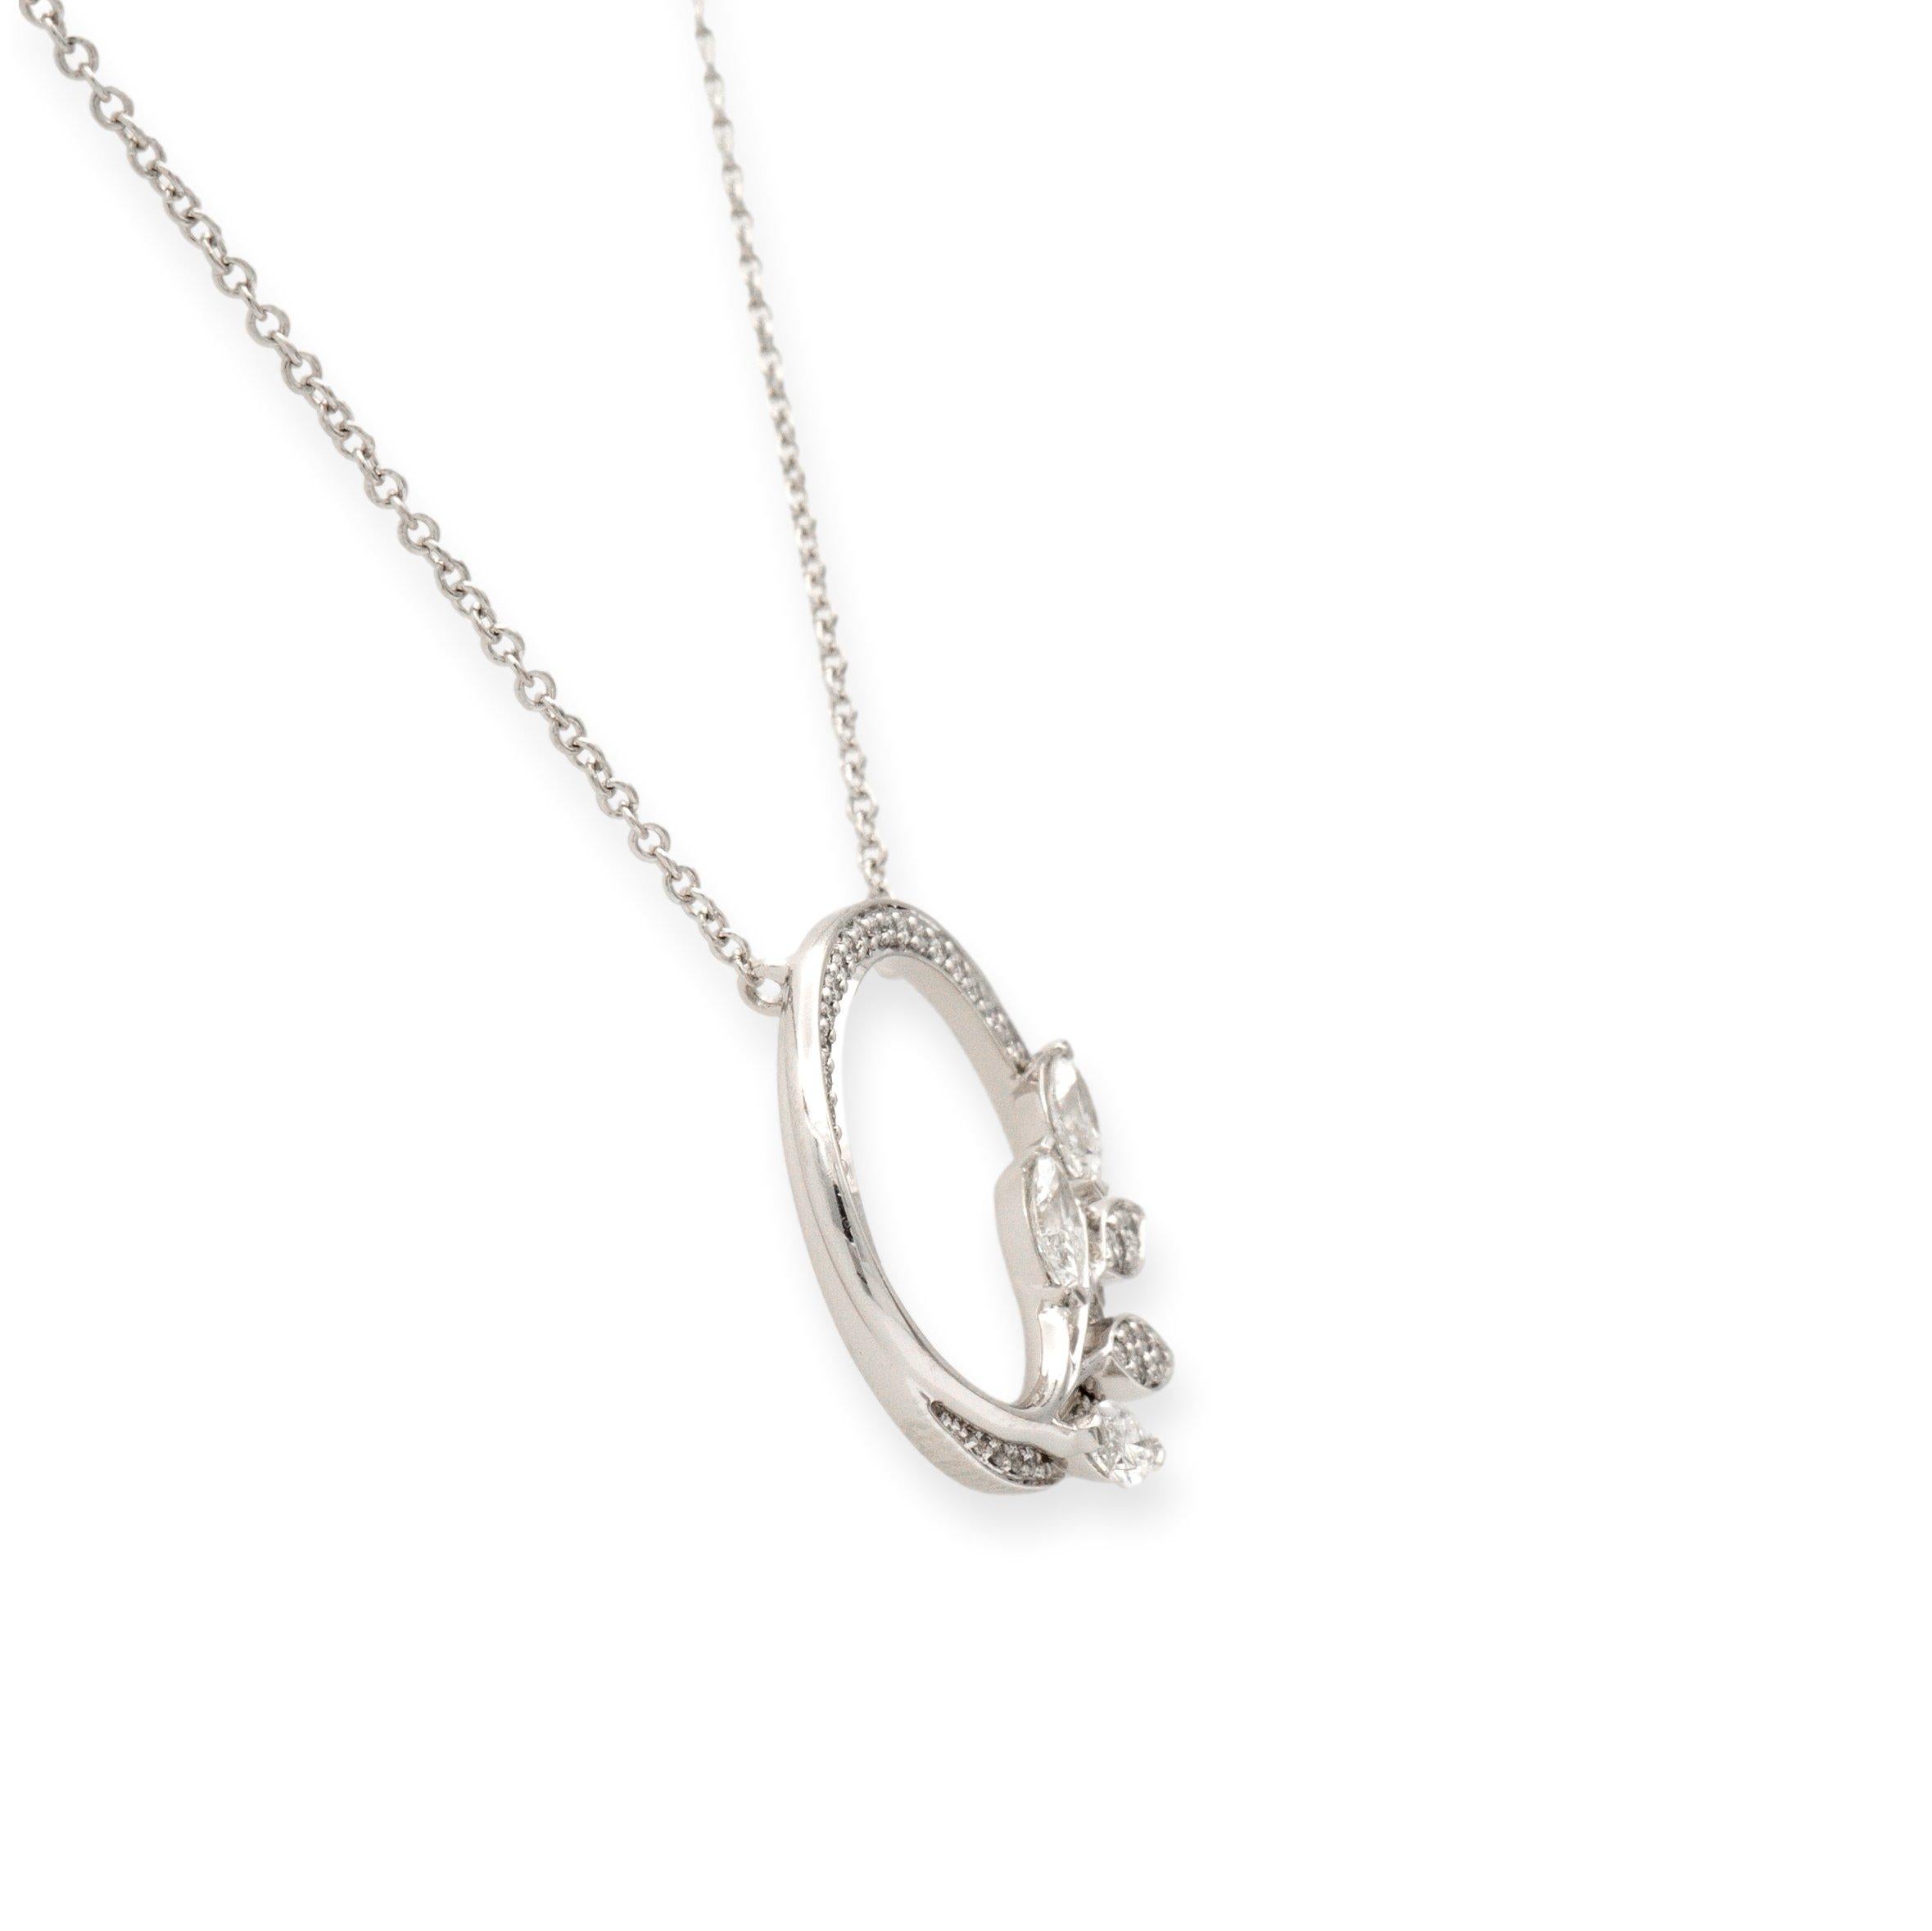 Introducing the epitome of elegance and grace - the Tiffany & Co. pendant necklace from the Vine Victoria collection. Meticulously crafted in lustrous platinum, this exquisite piece boasts a harmonious blend of marquise and round brilliant cut